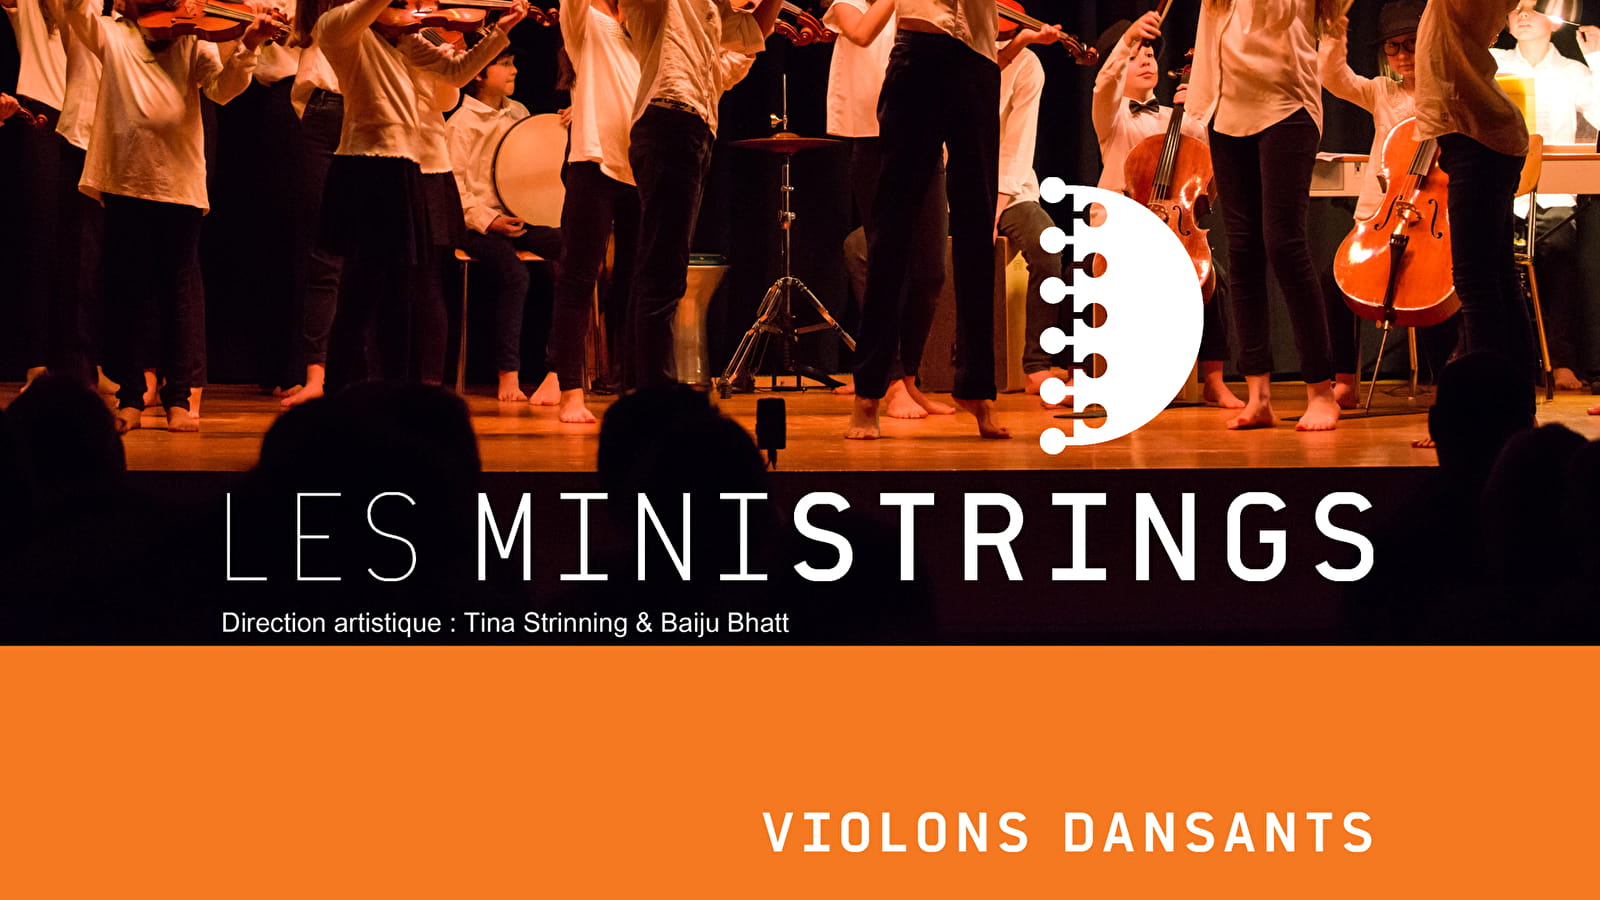 Les Ministrings in concert